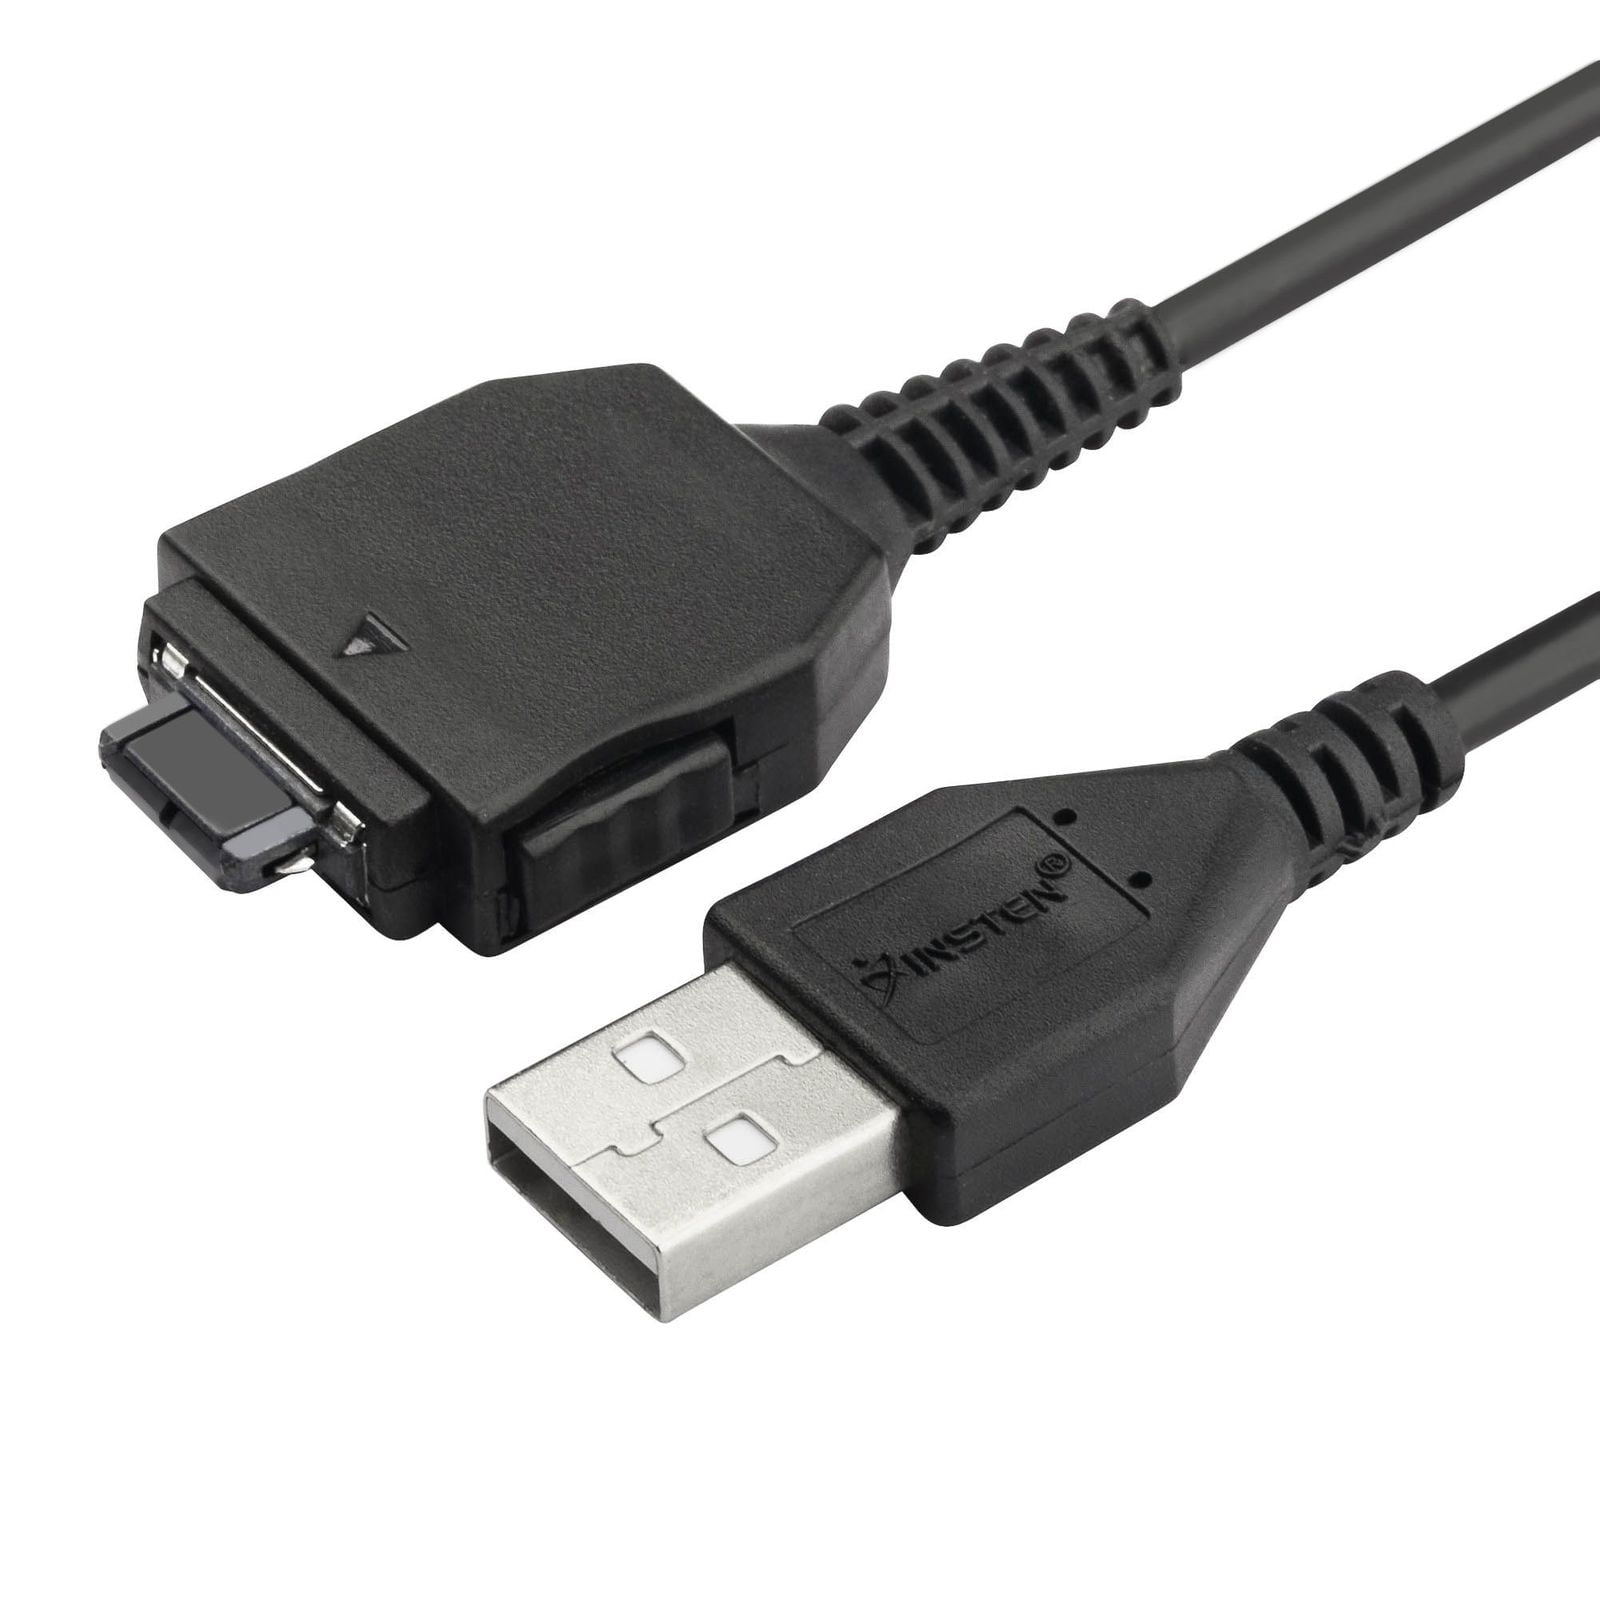 SONY  DSC-W30,DSC-W30/B CAMERA USB DATA SYNC CABLE LEAD FOR PC AND MAC 